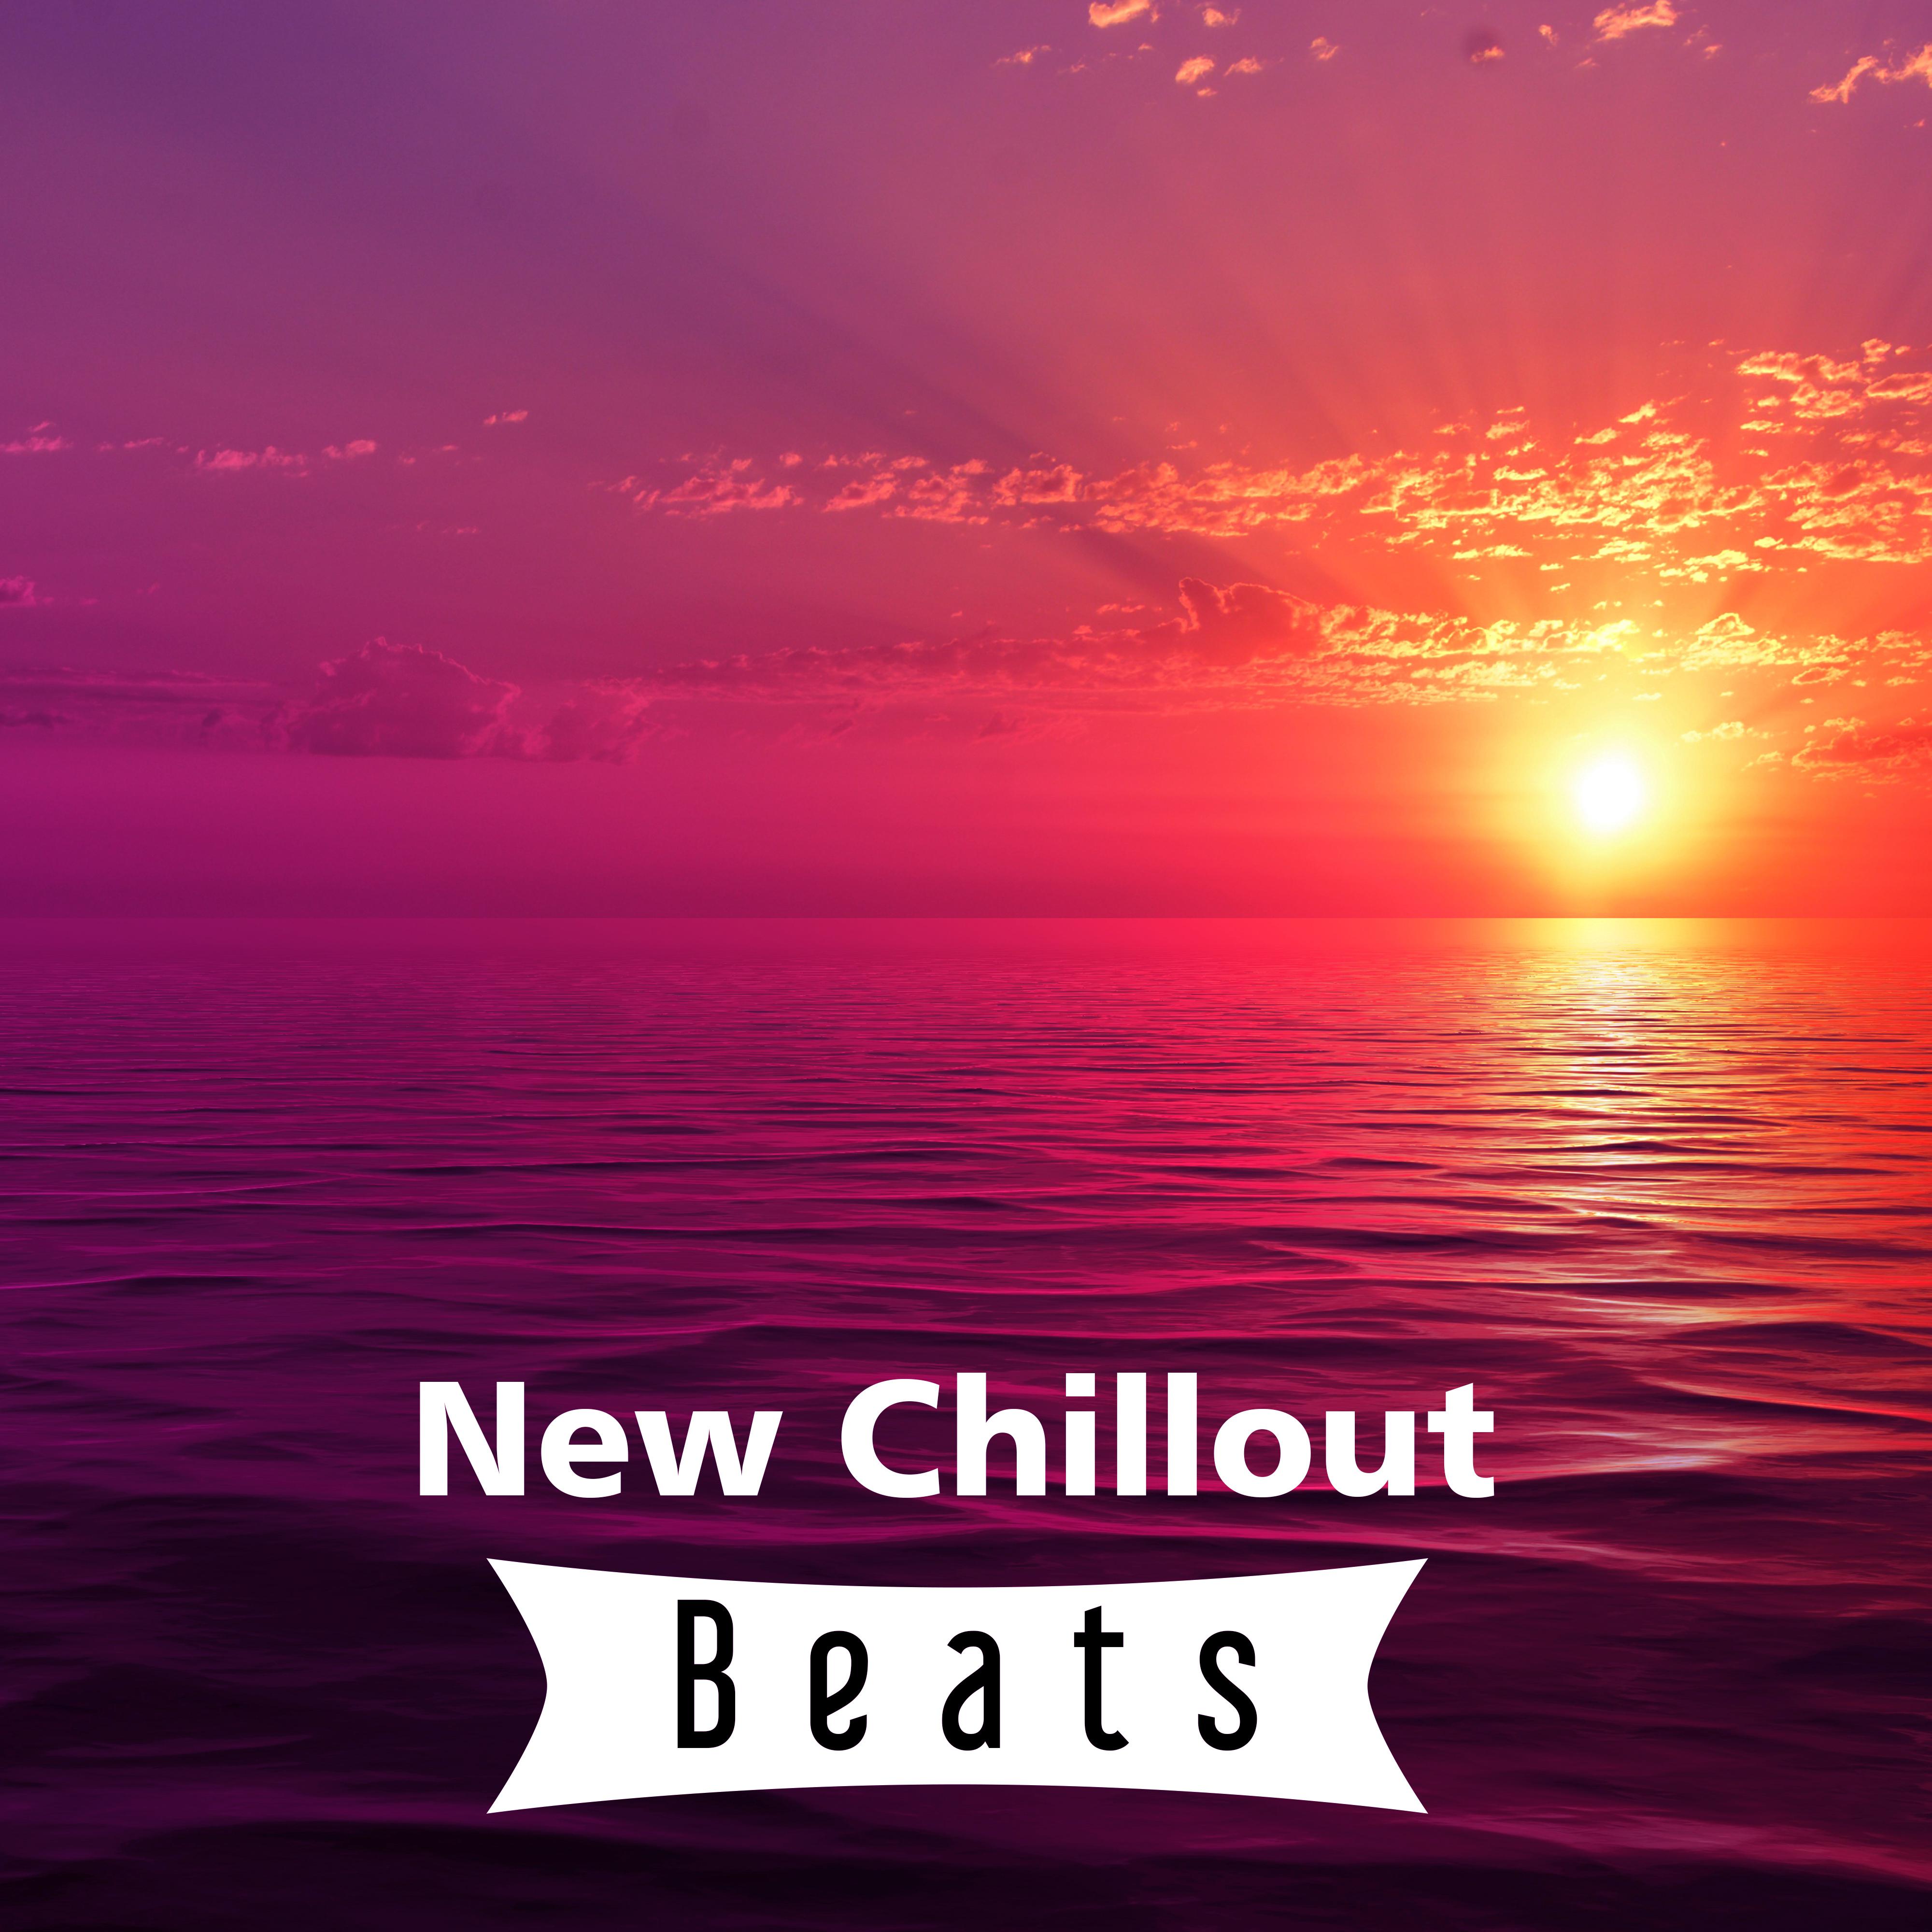 New Chillout Beats – Deep Chillout Beats, Relax & Fun, Summer Vibes, Best Chill Out 2017